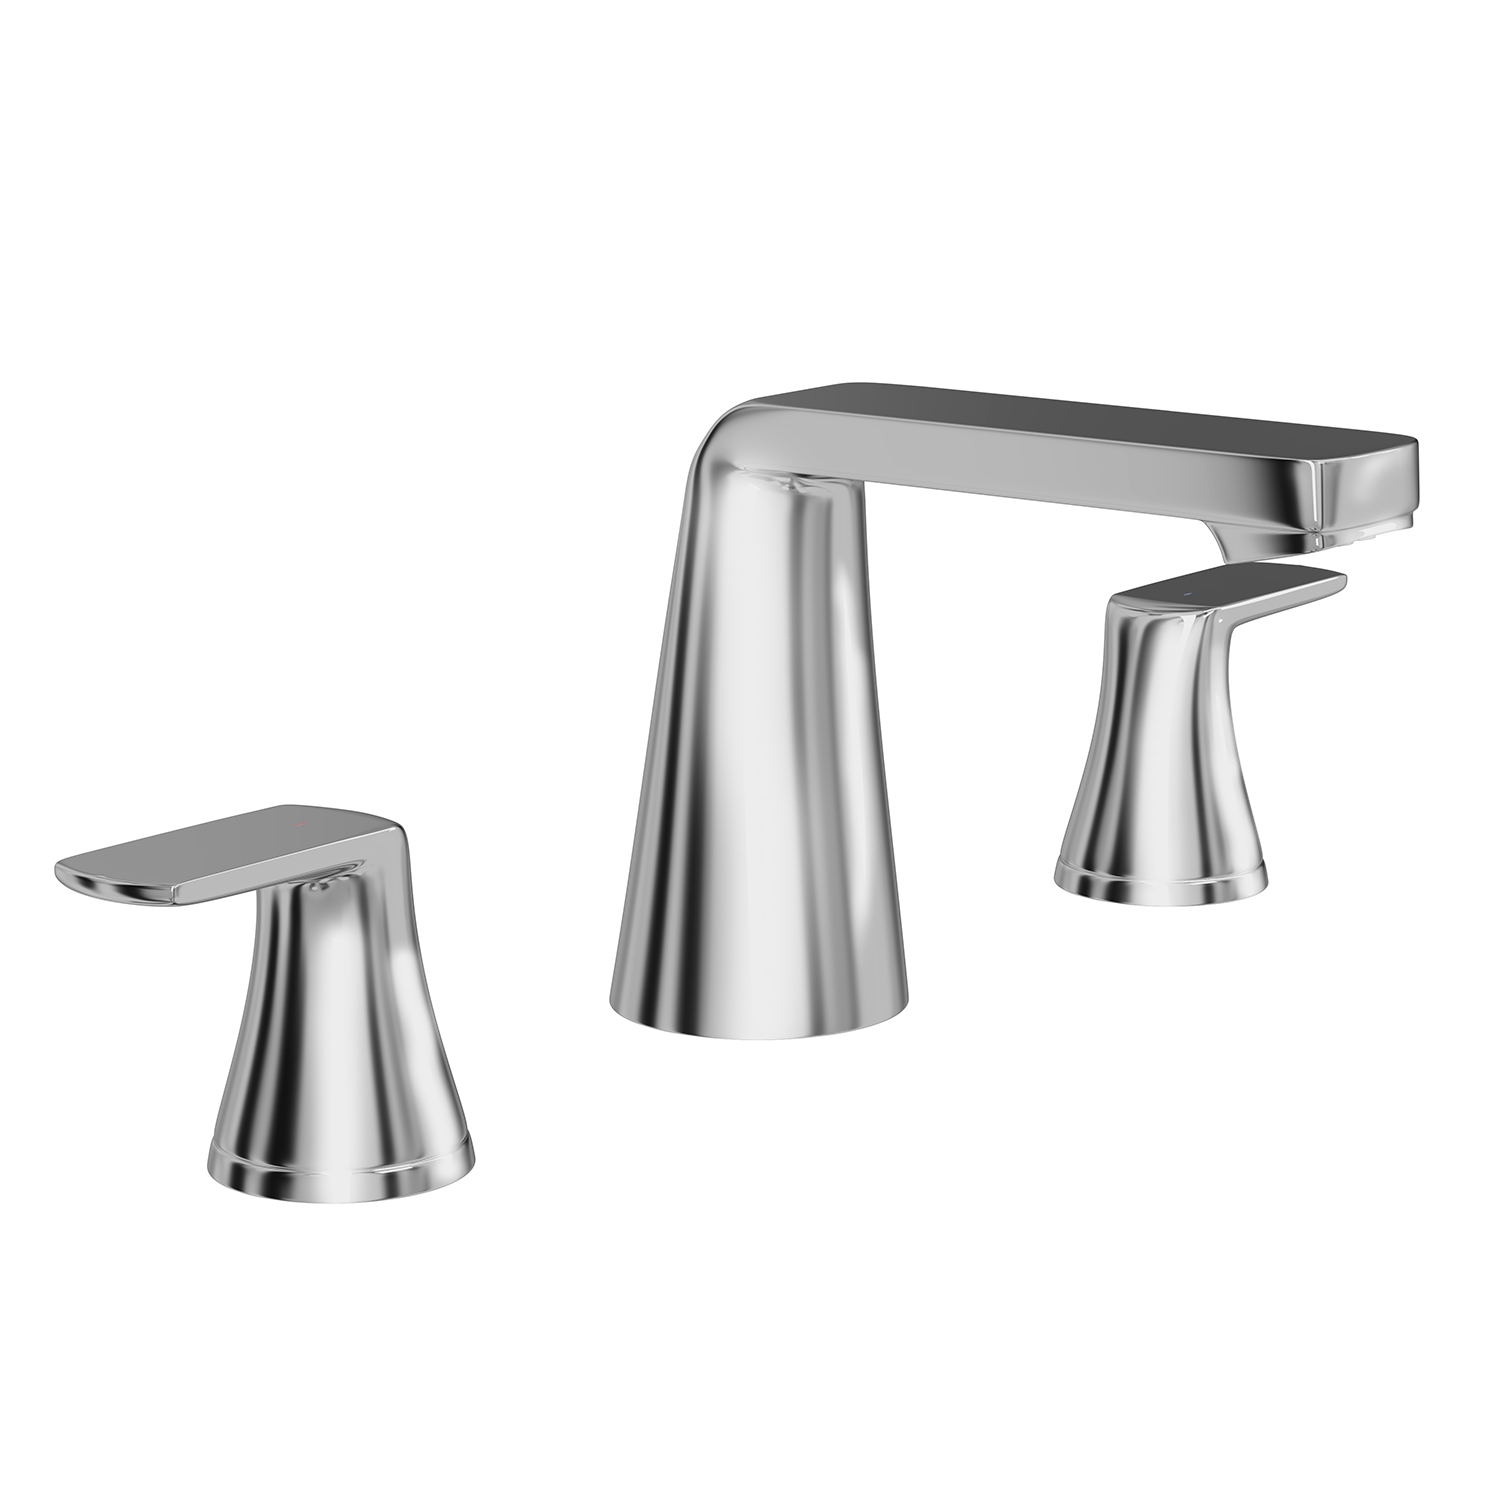 DAX Two Handle Bathroom Faucet, Brass Body, Chrome Finish, Spout Height 4 Inches (DAX-8236C-CR)